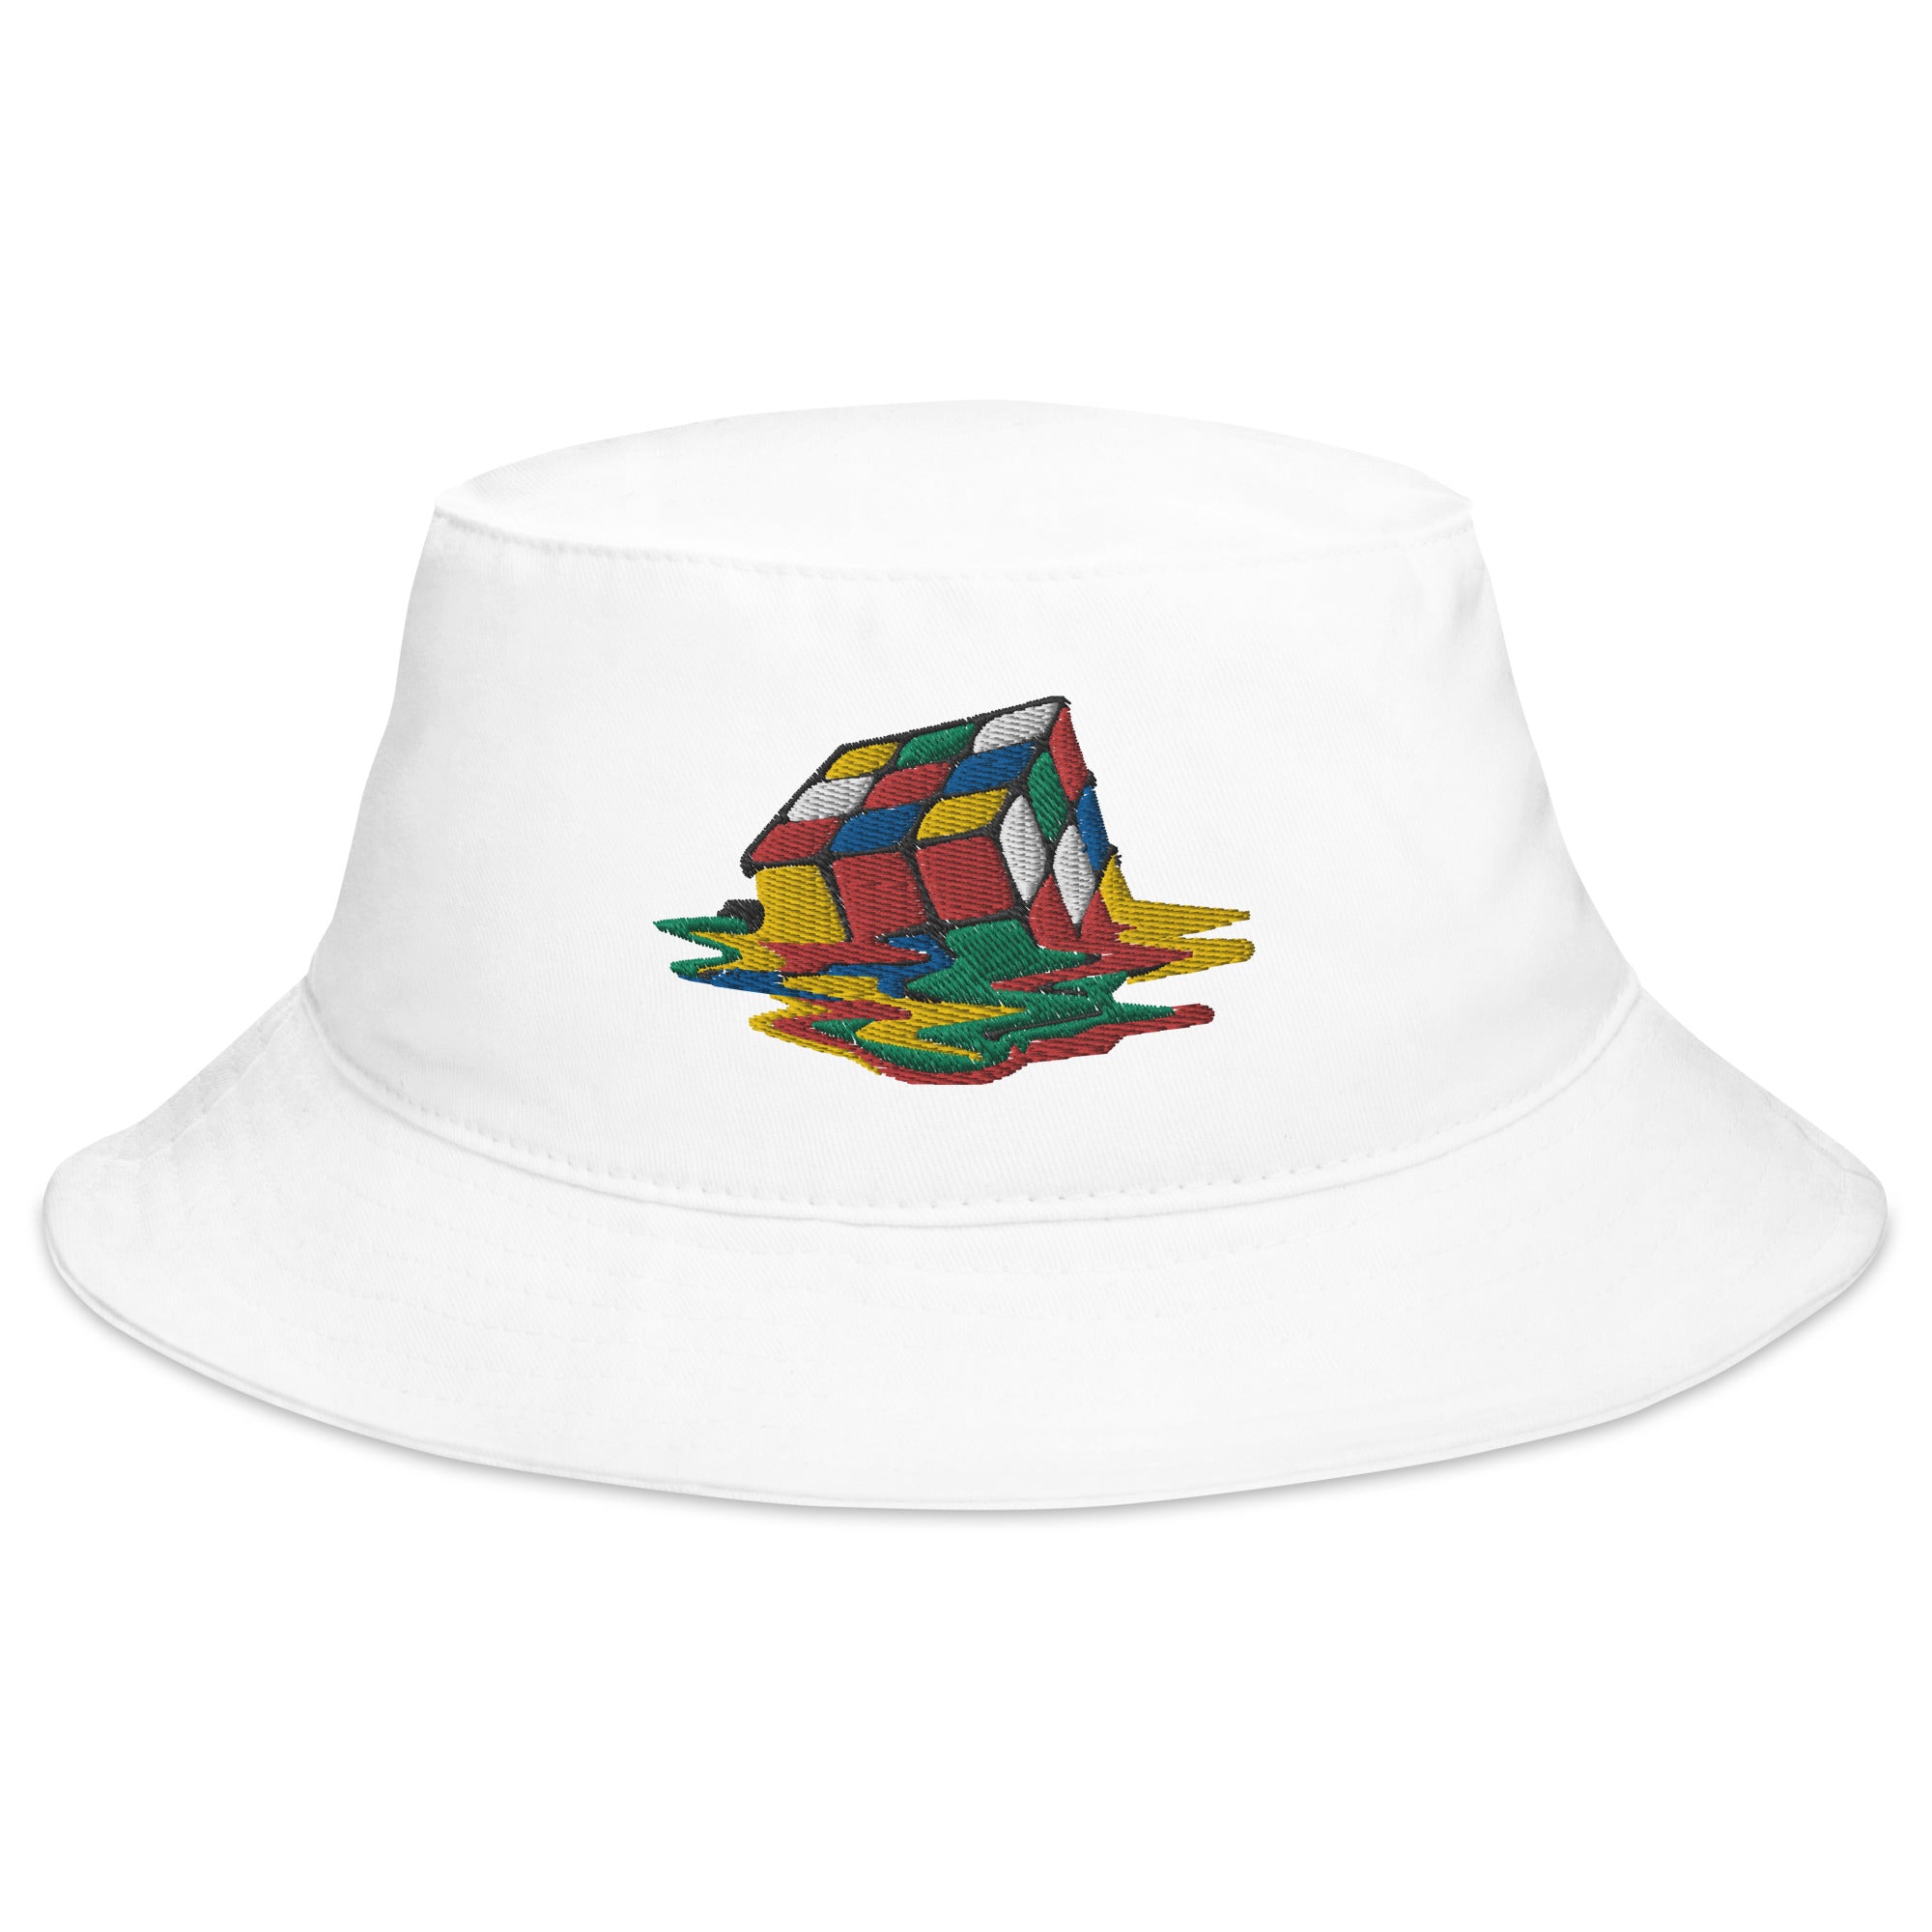 Melting Speed Cube Gaming Puzzle Box Embroidered Bucket Hat